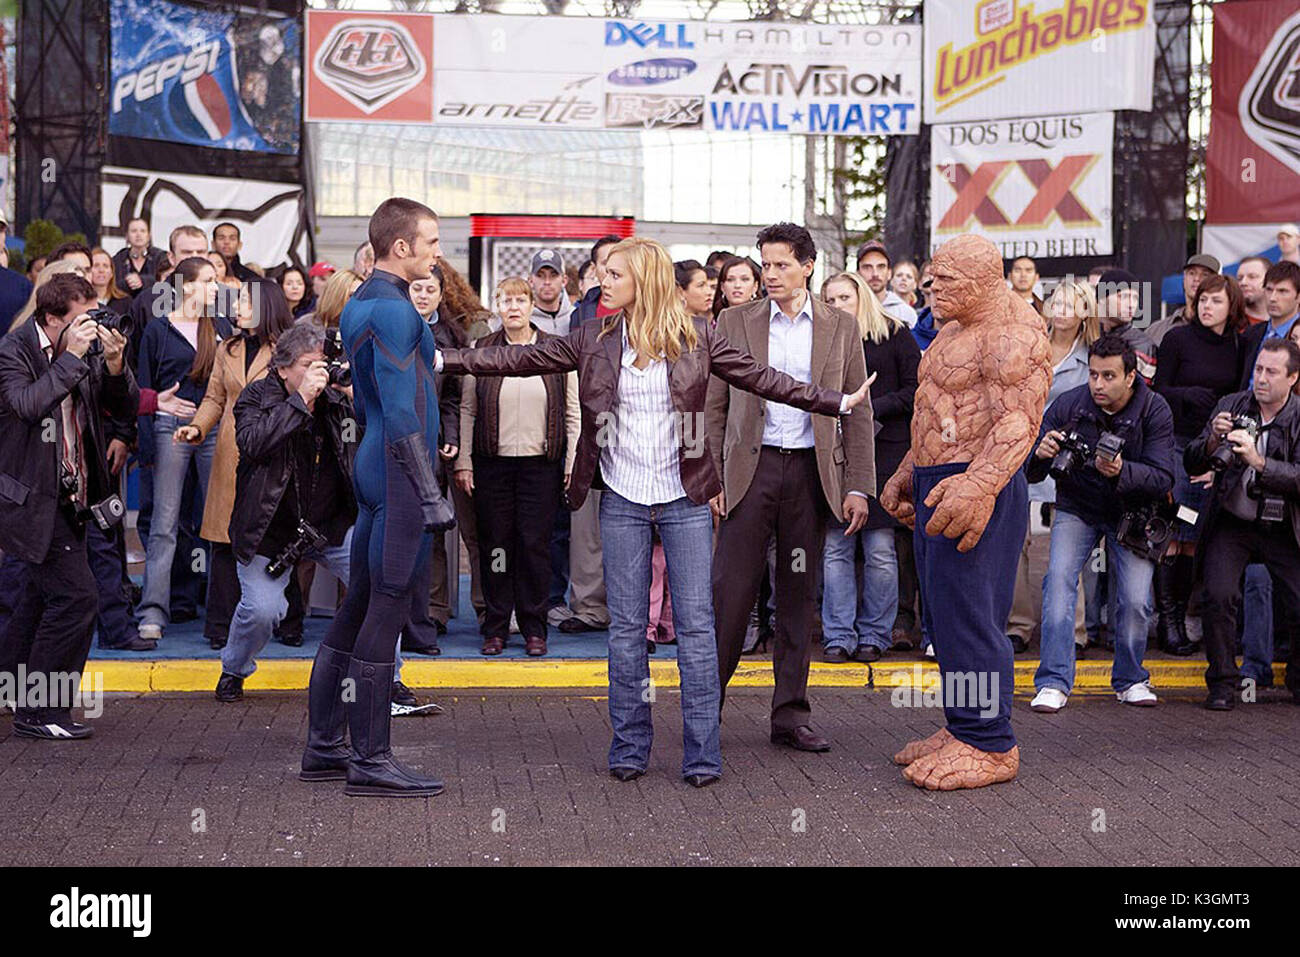 FANTASTIC FOUR CHRIS EVANS as The Human Torch, JESSICA ALBA as The Invisible Woman, IOAN GRUFFUDD as Mr. Fantastic, MICHAEL CHIKLIS as The Thing     Date: 2005 Stock Photo